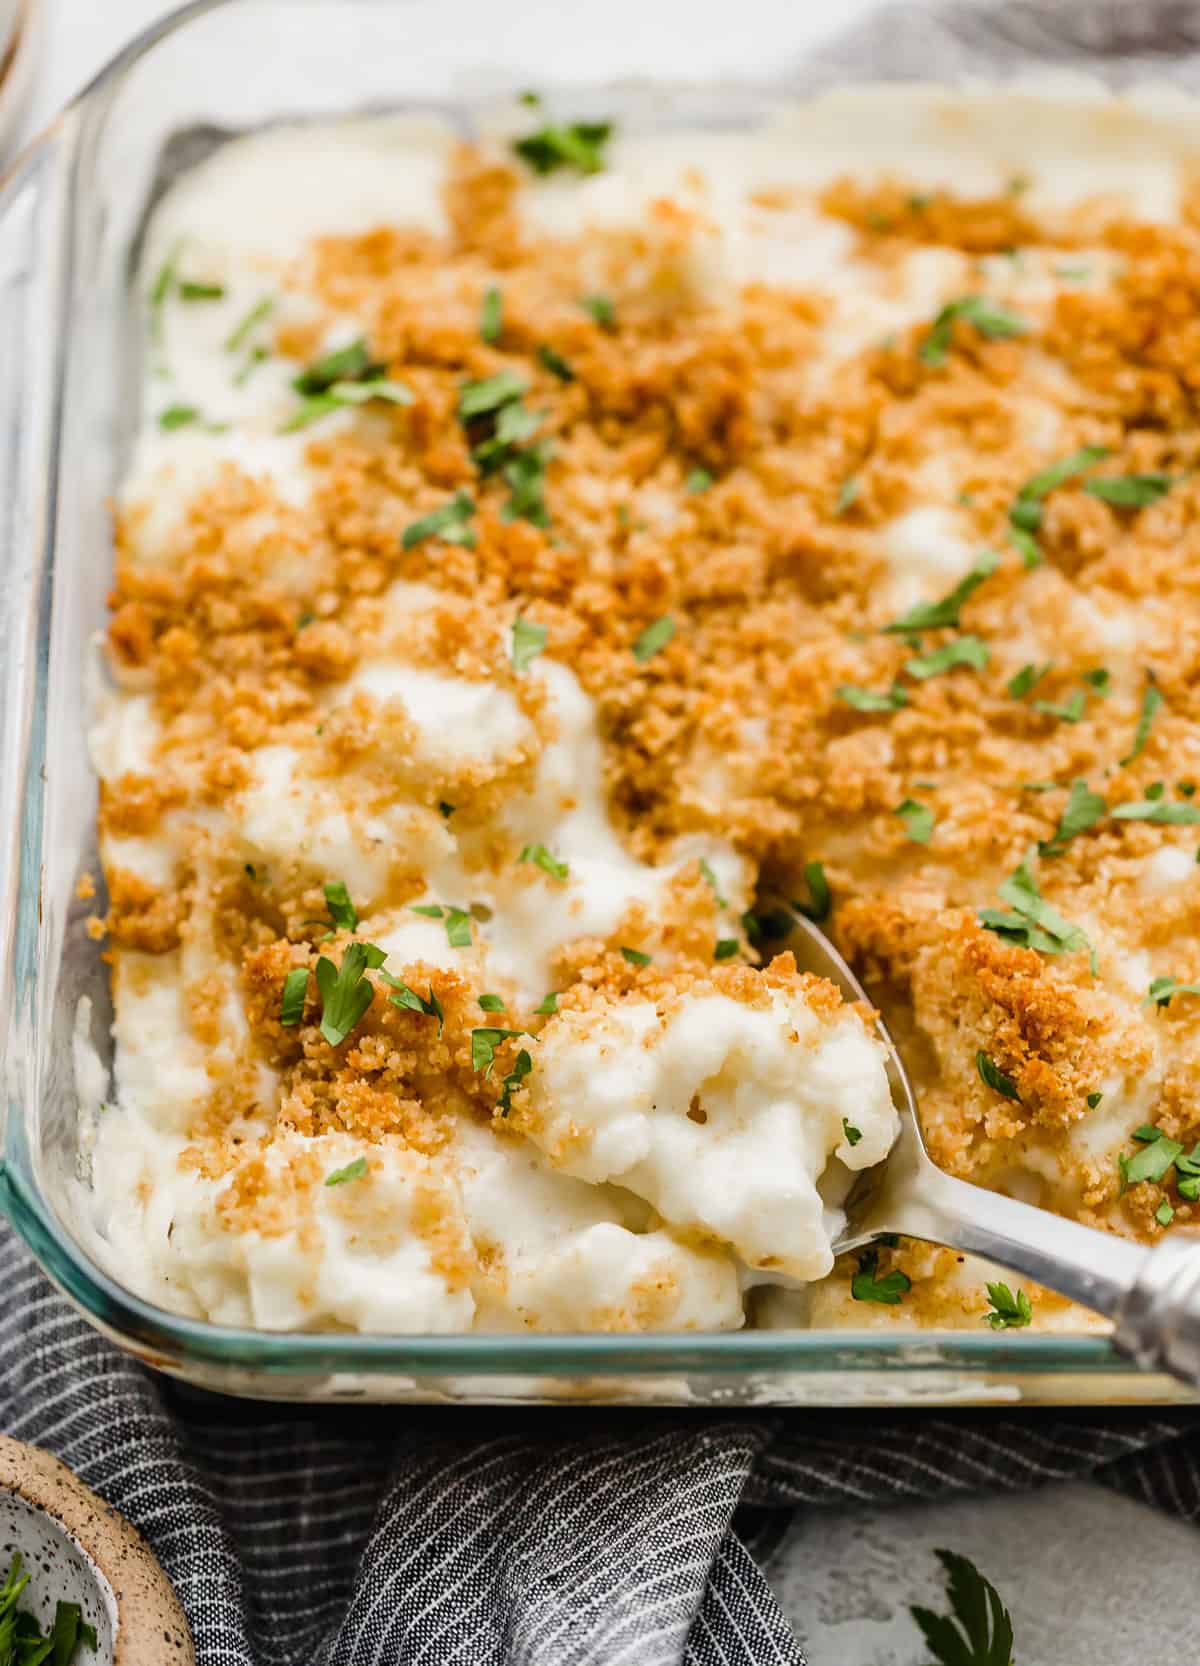 Cheesy breadcrumb and parsley topped Cauliflower Gratin in a glass square baking dish.